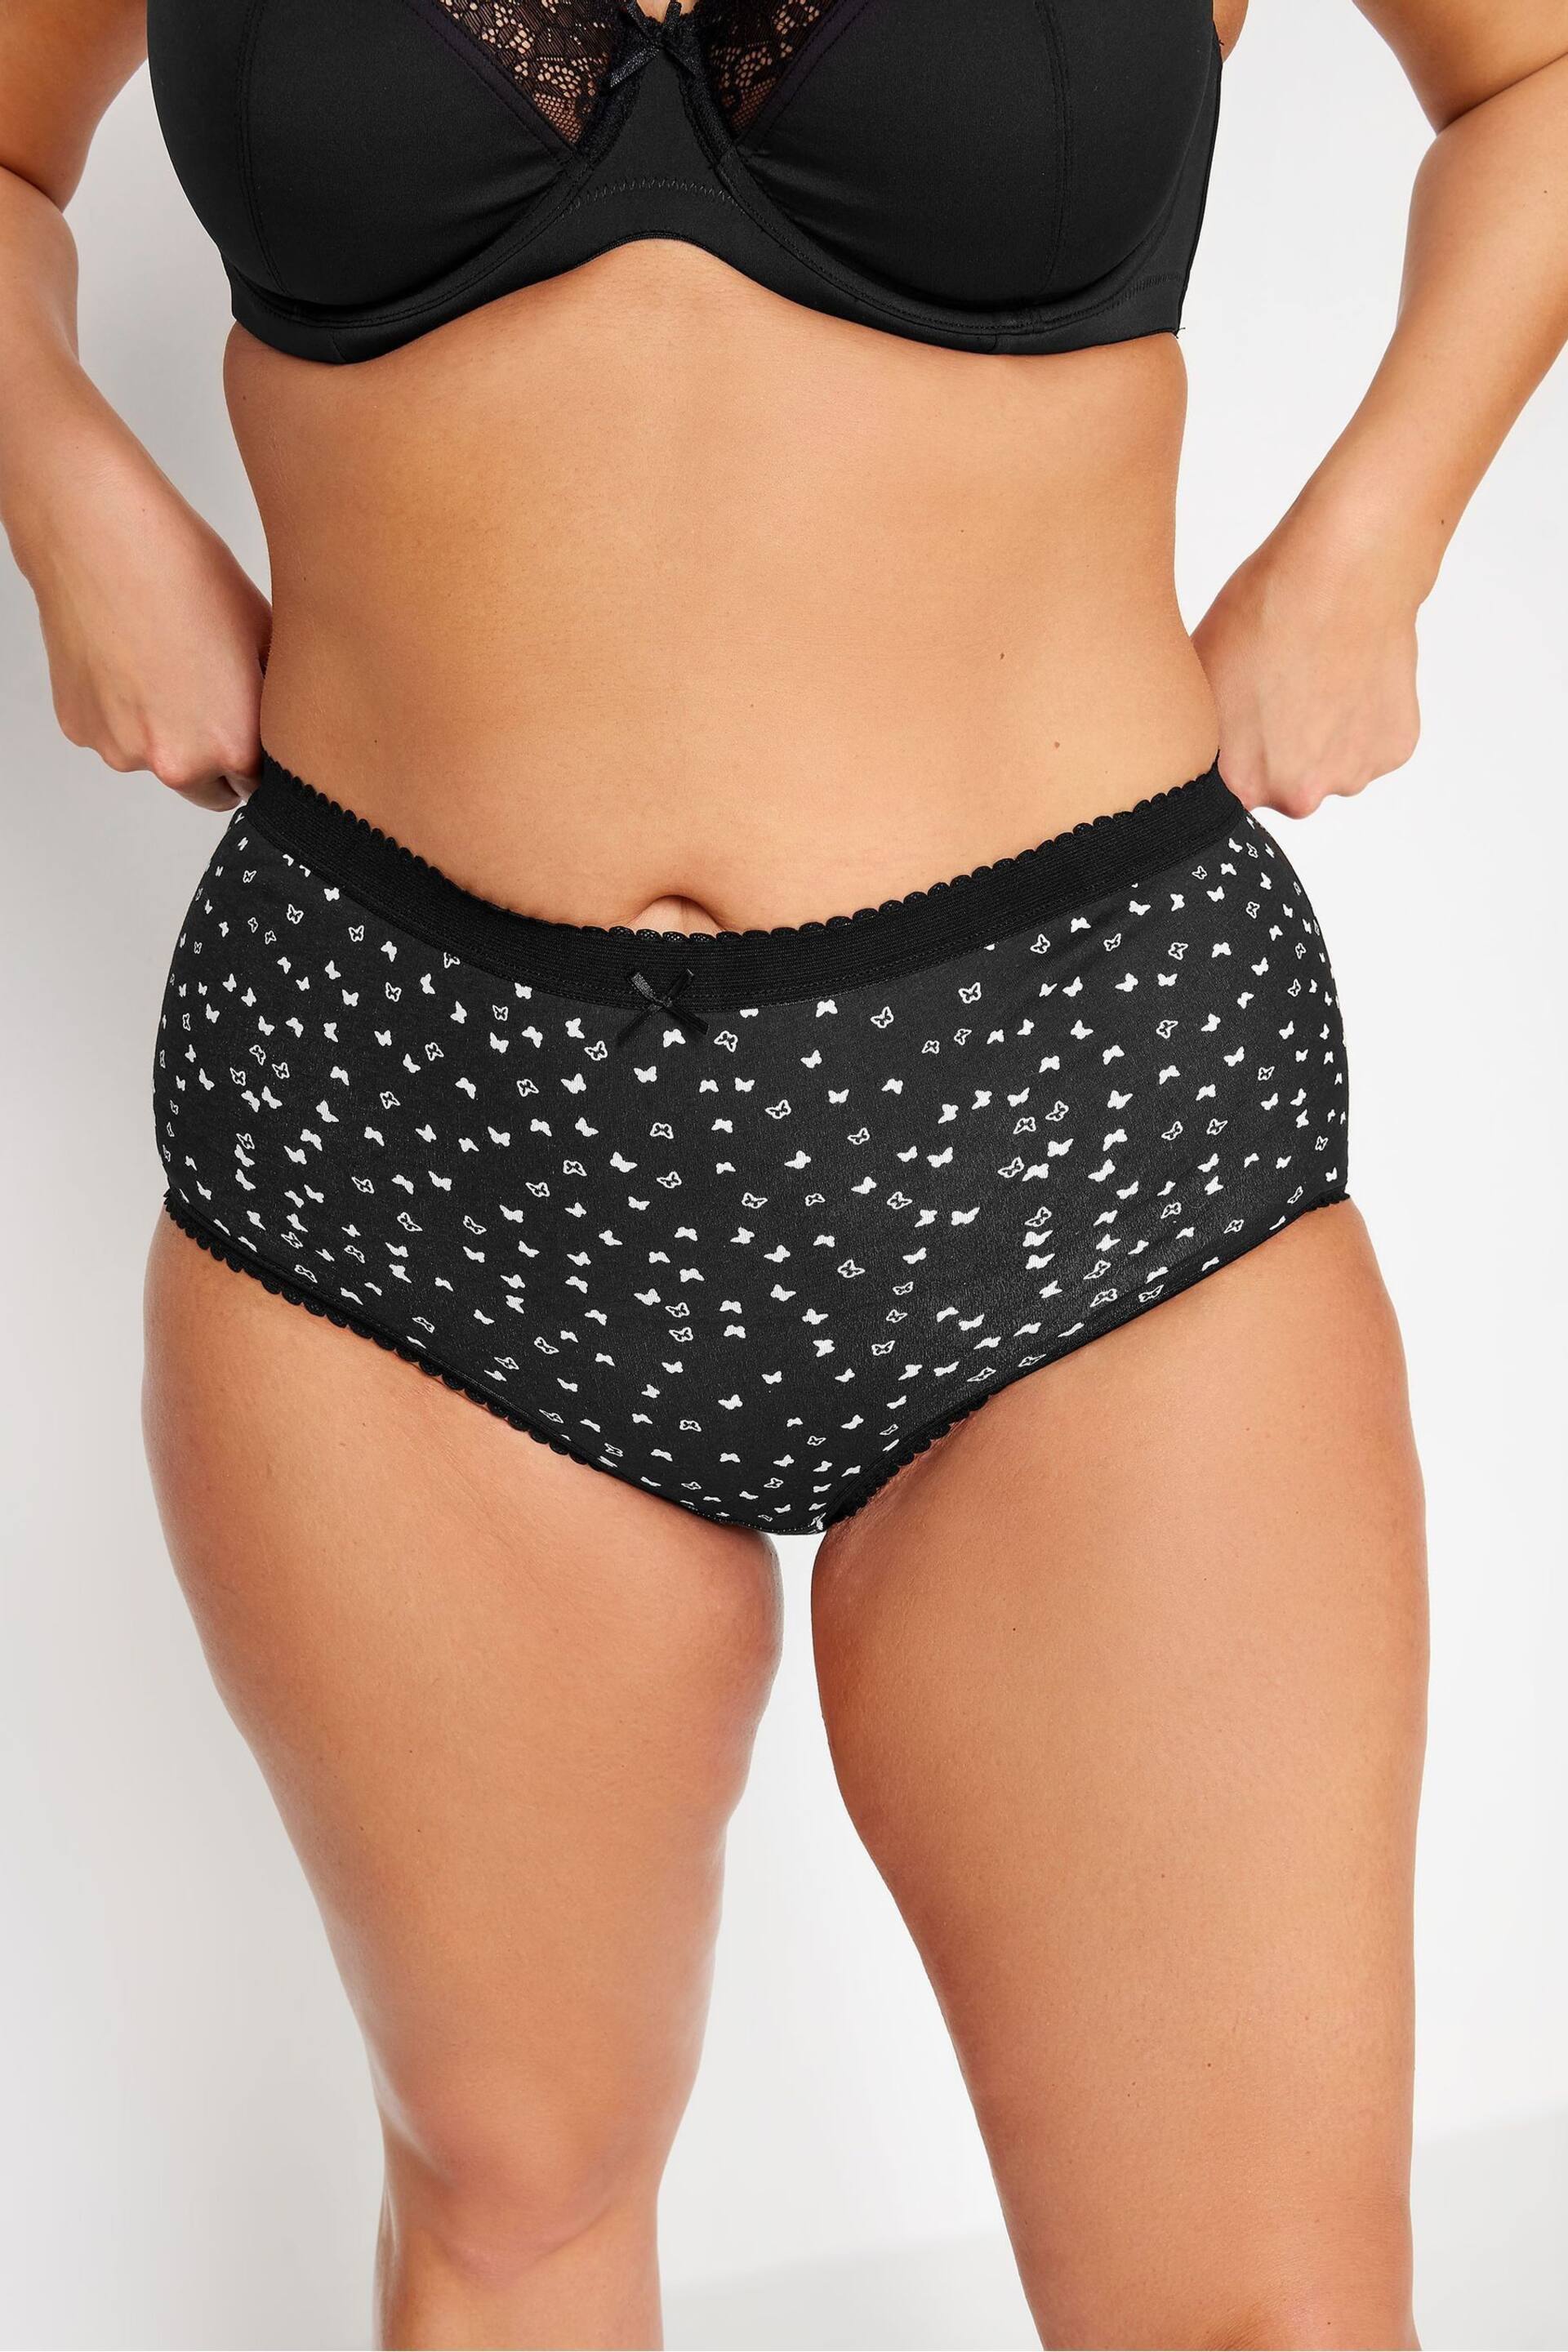 Yours Curve Black 5 PACK Butterfly Design High Waisted Full Briefs - Image 2 of 2